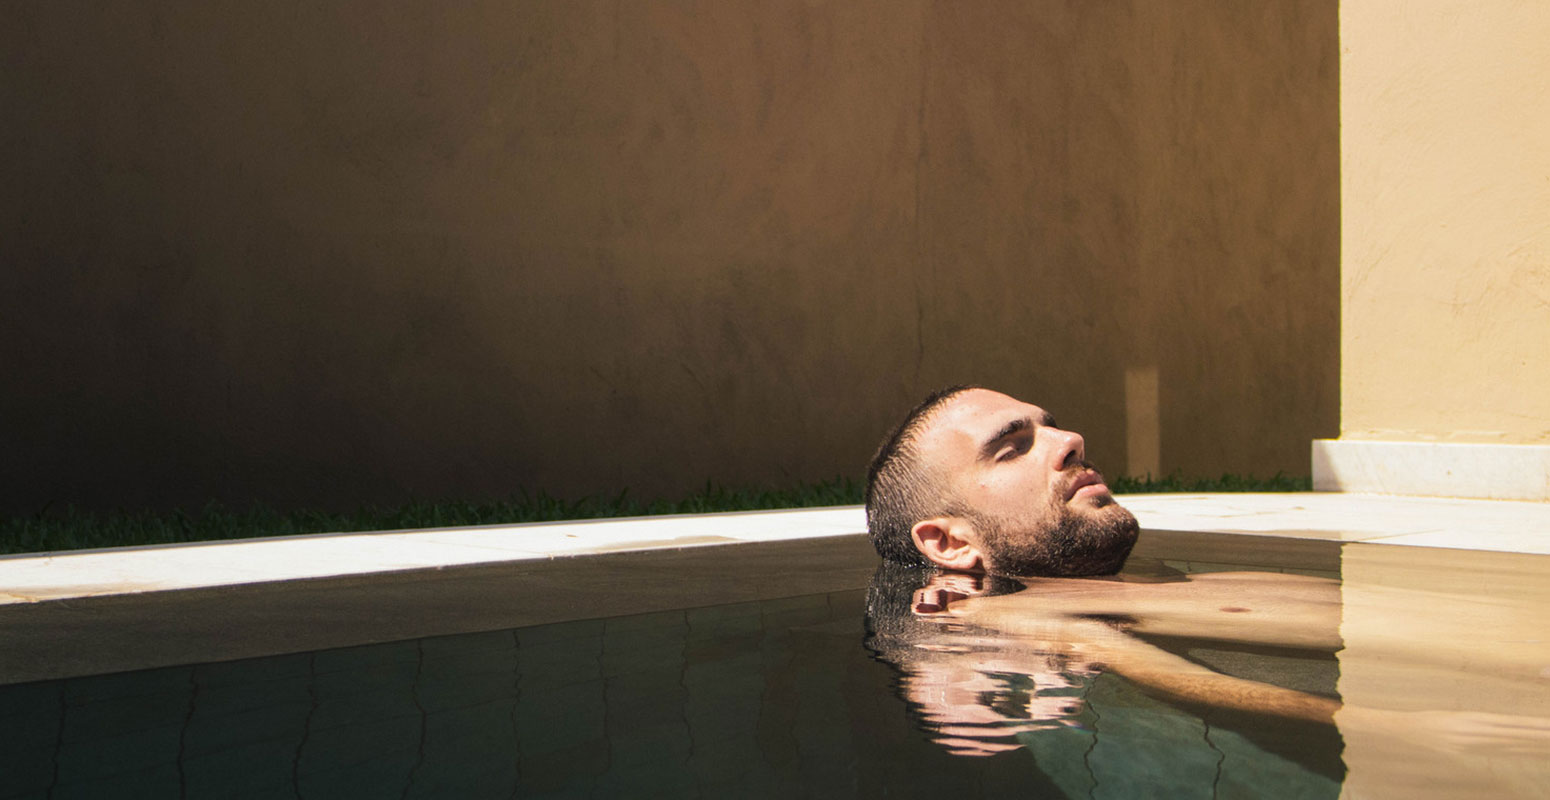 man's head above water relaxing his mind